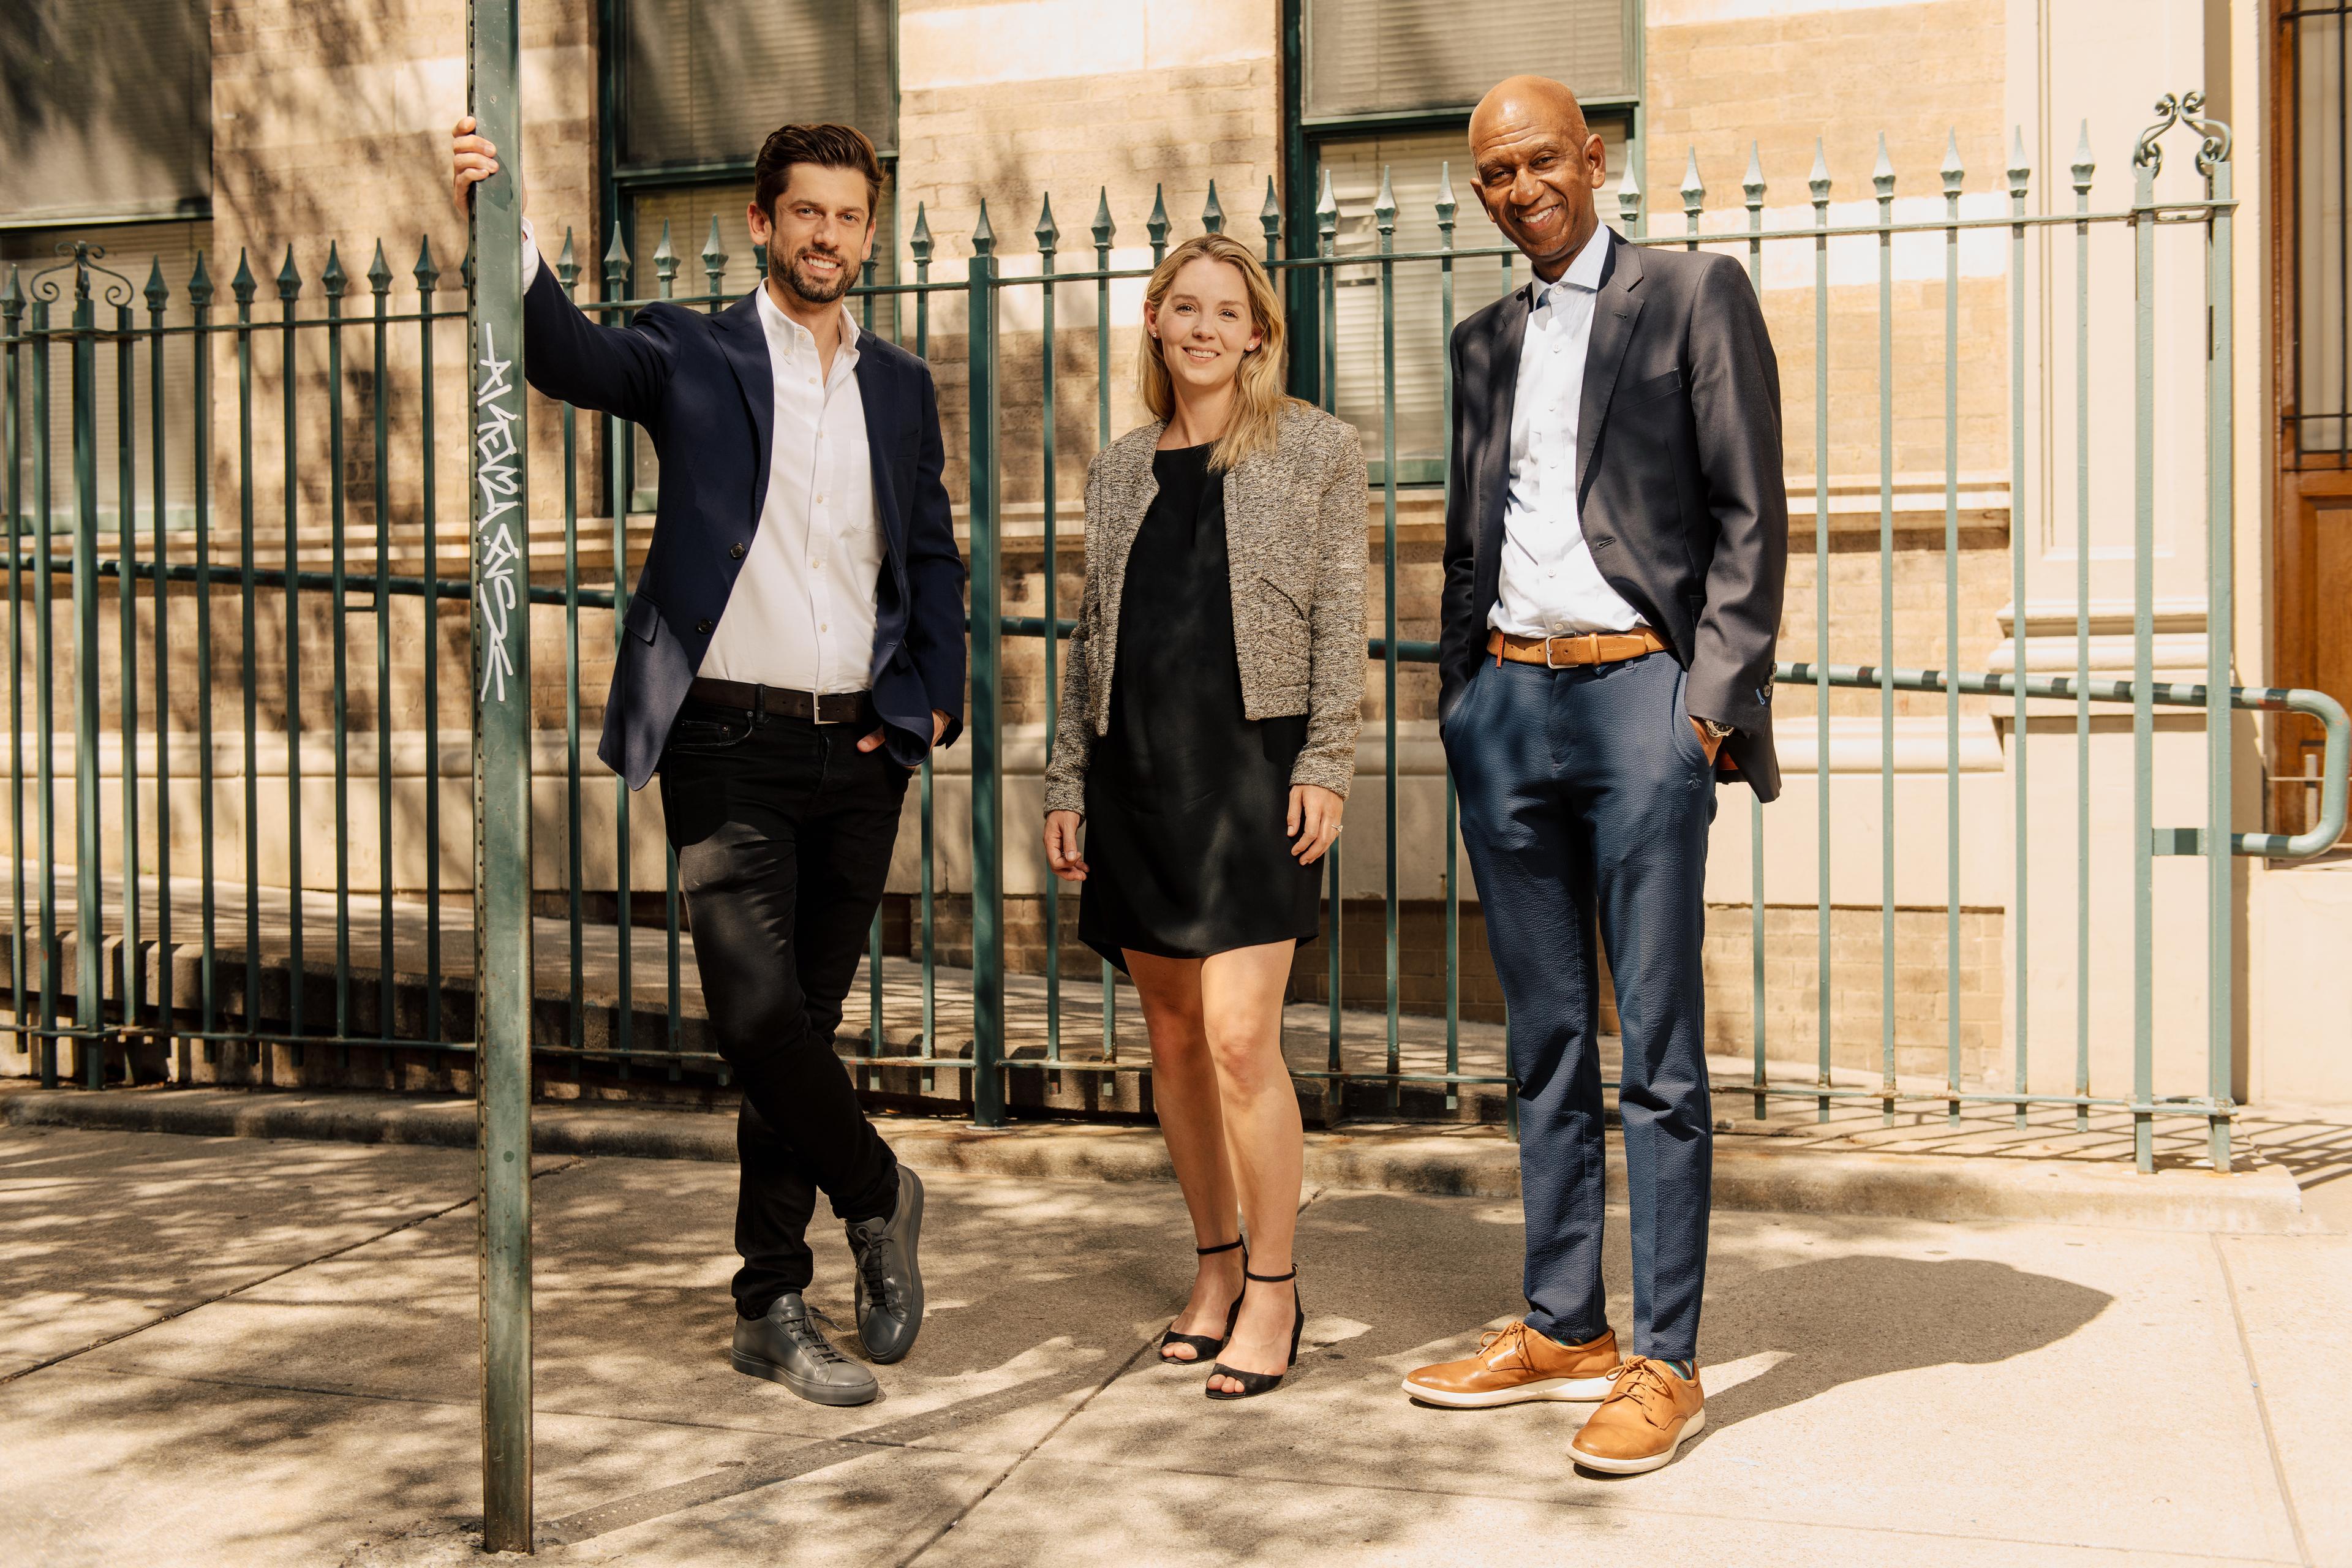 From left to right: Co-founders of Dure Investment Group, Rodrigo da Silva and Christine Wendell, with their project partner Jim Simmons, CEO and Founding Partner of Asland Capital